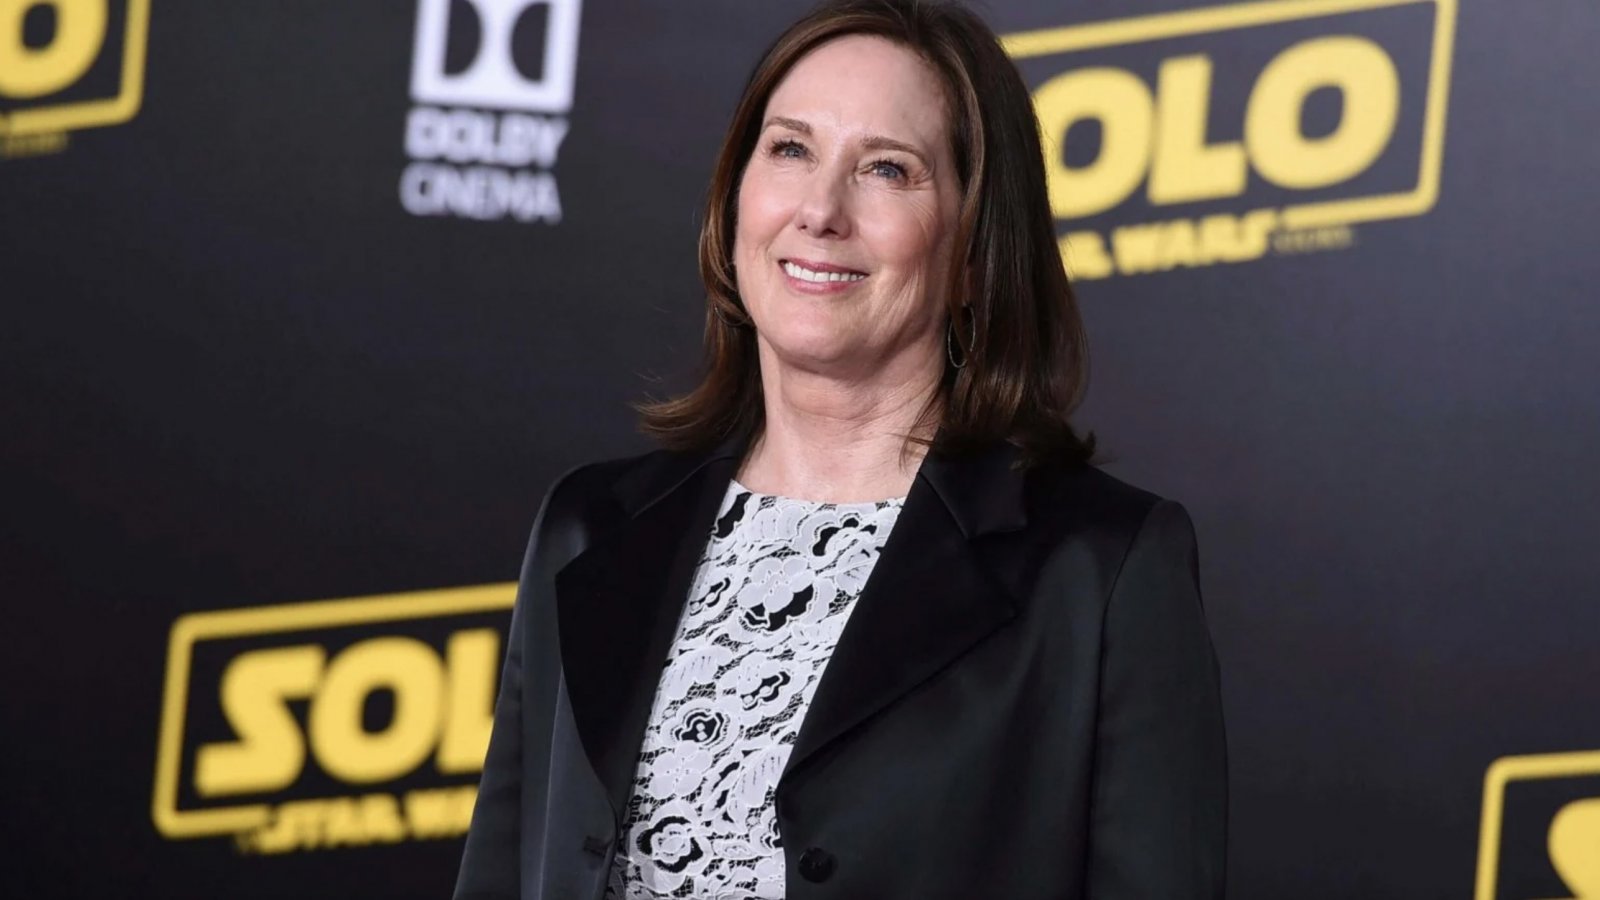 'Star Wars' Kathleen Kennedy: 'The franchise is ready to leave George Lucas behind'